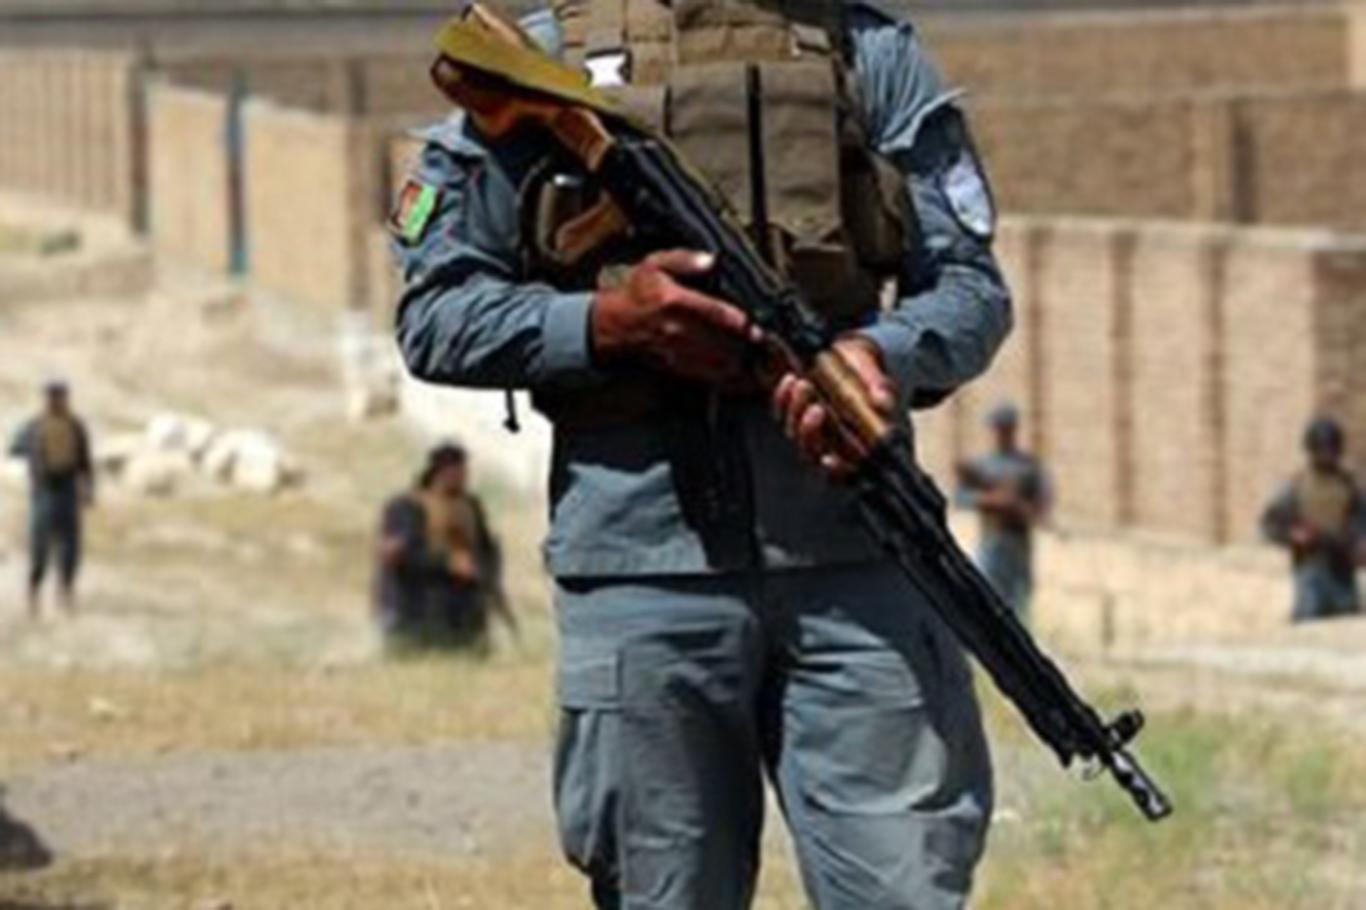 7 police killed; 3 others wounded in Afghanistan